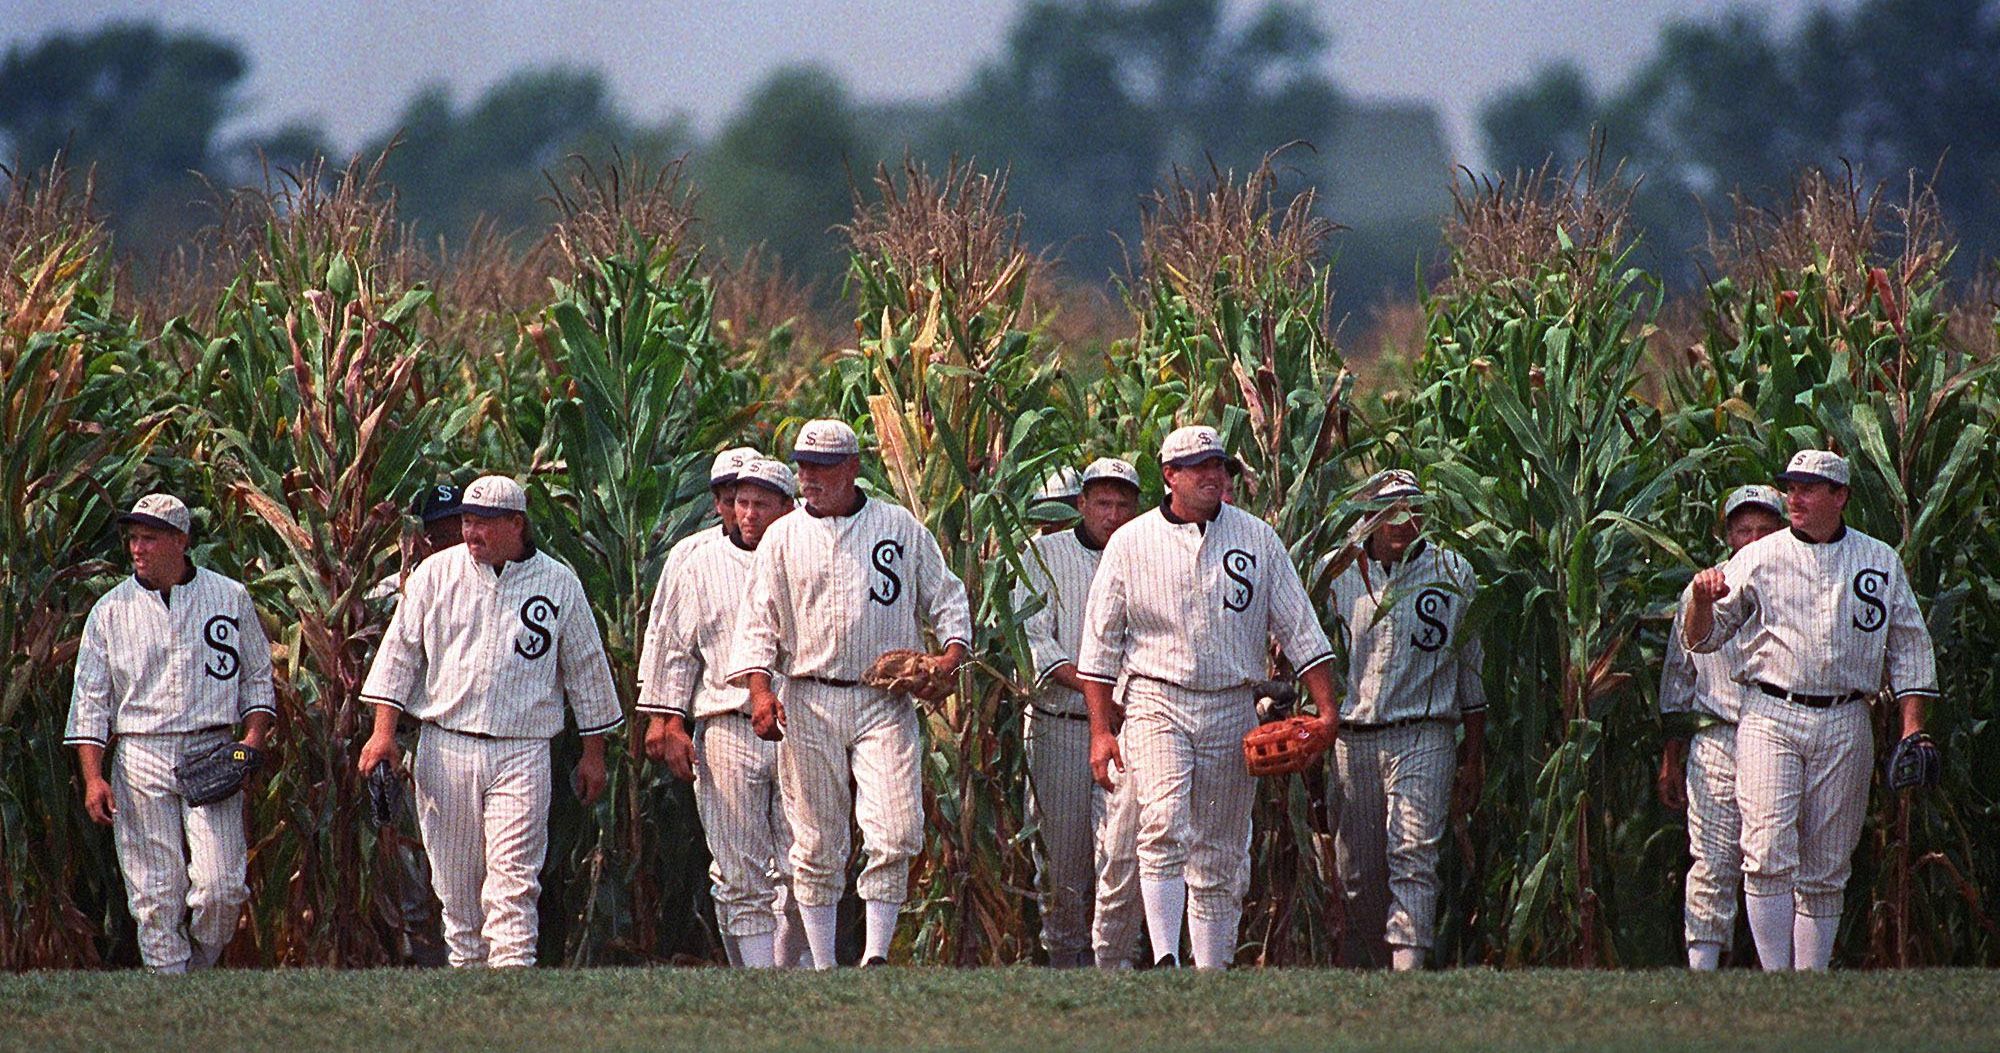 Field of Dreams Soars to #1 Following Epic MLB Game